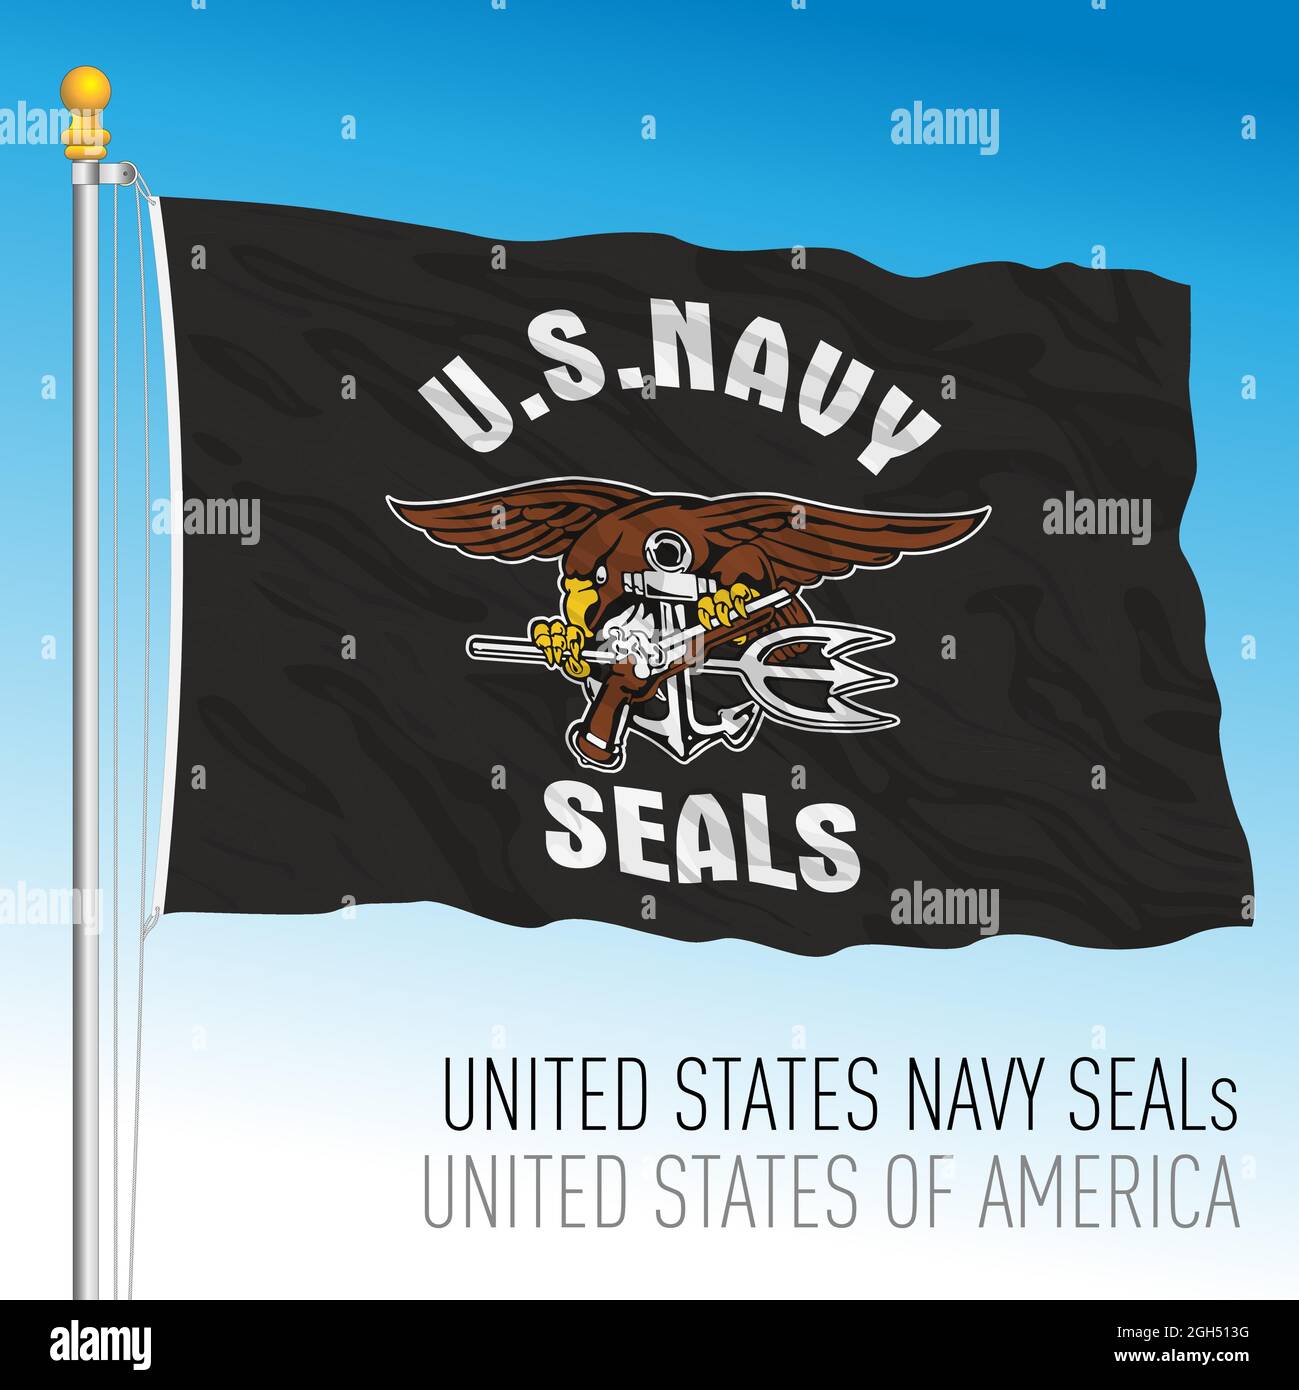 US Navy Seals flag, United States of America, vector illustration Stock Vector